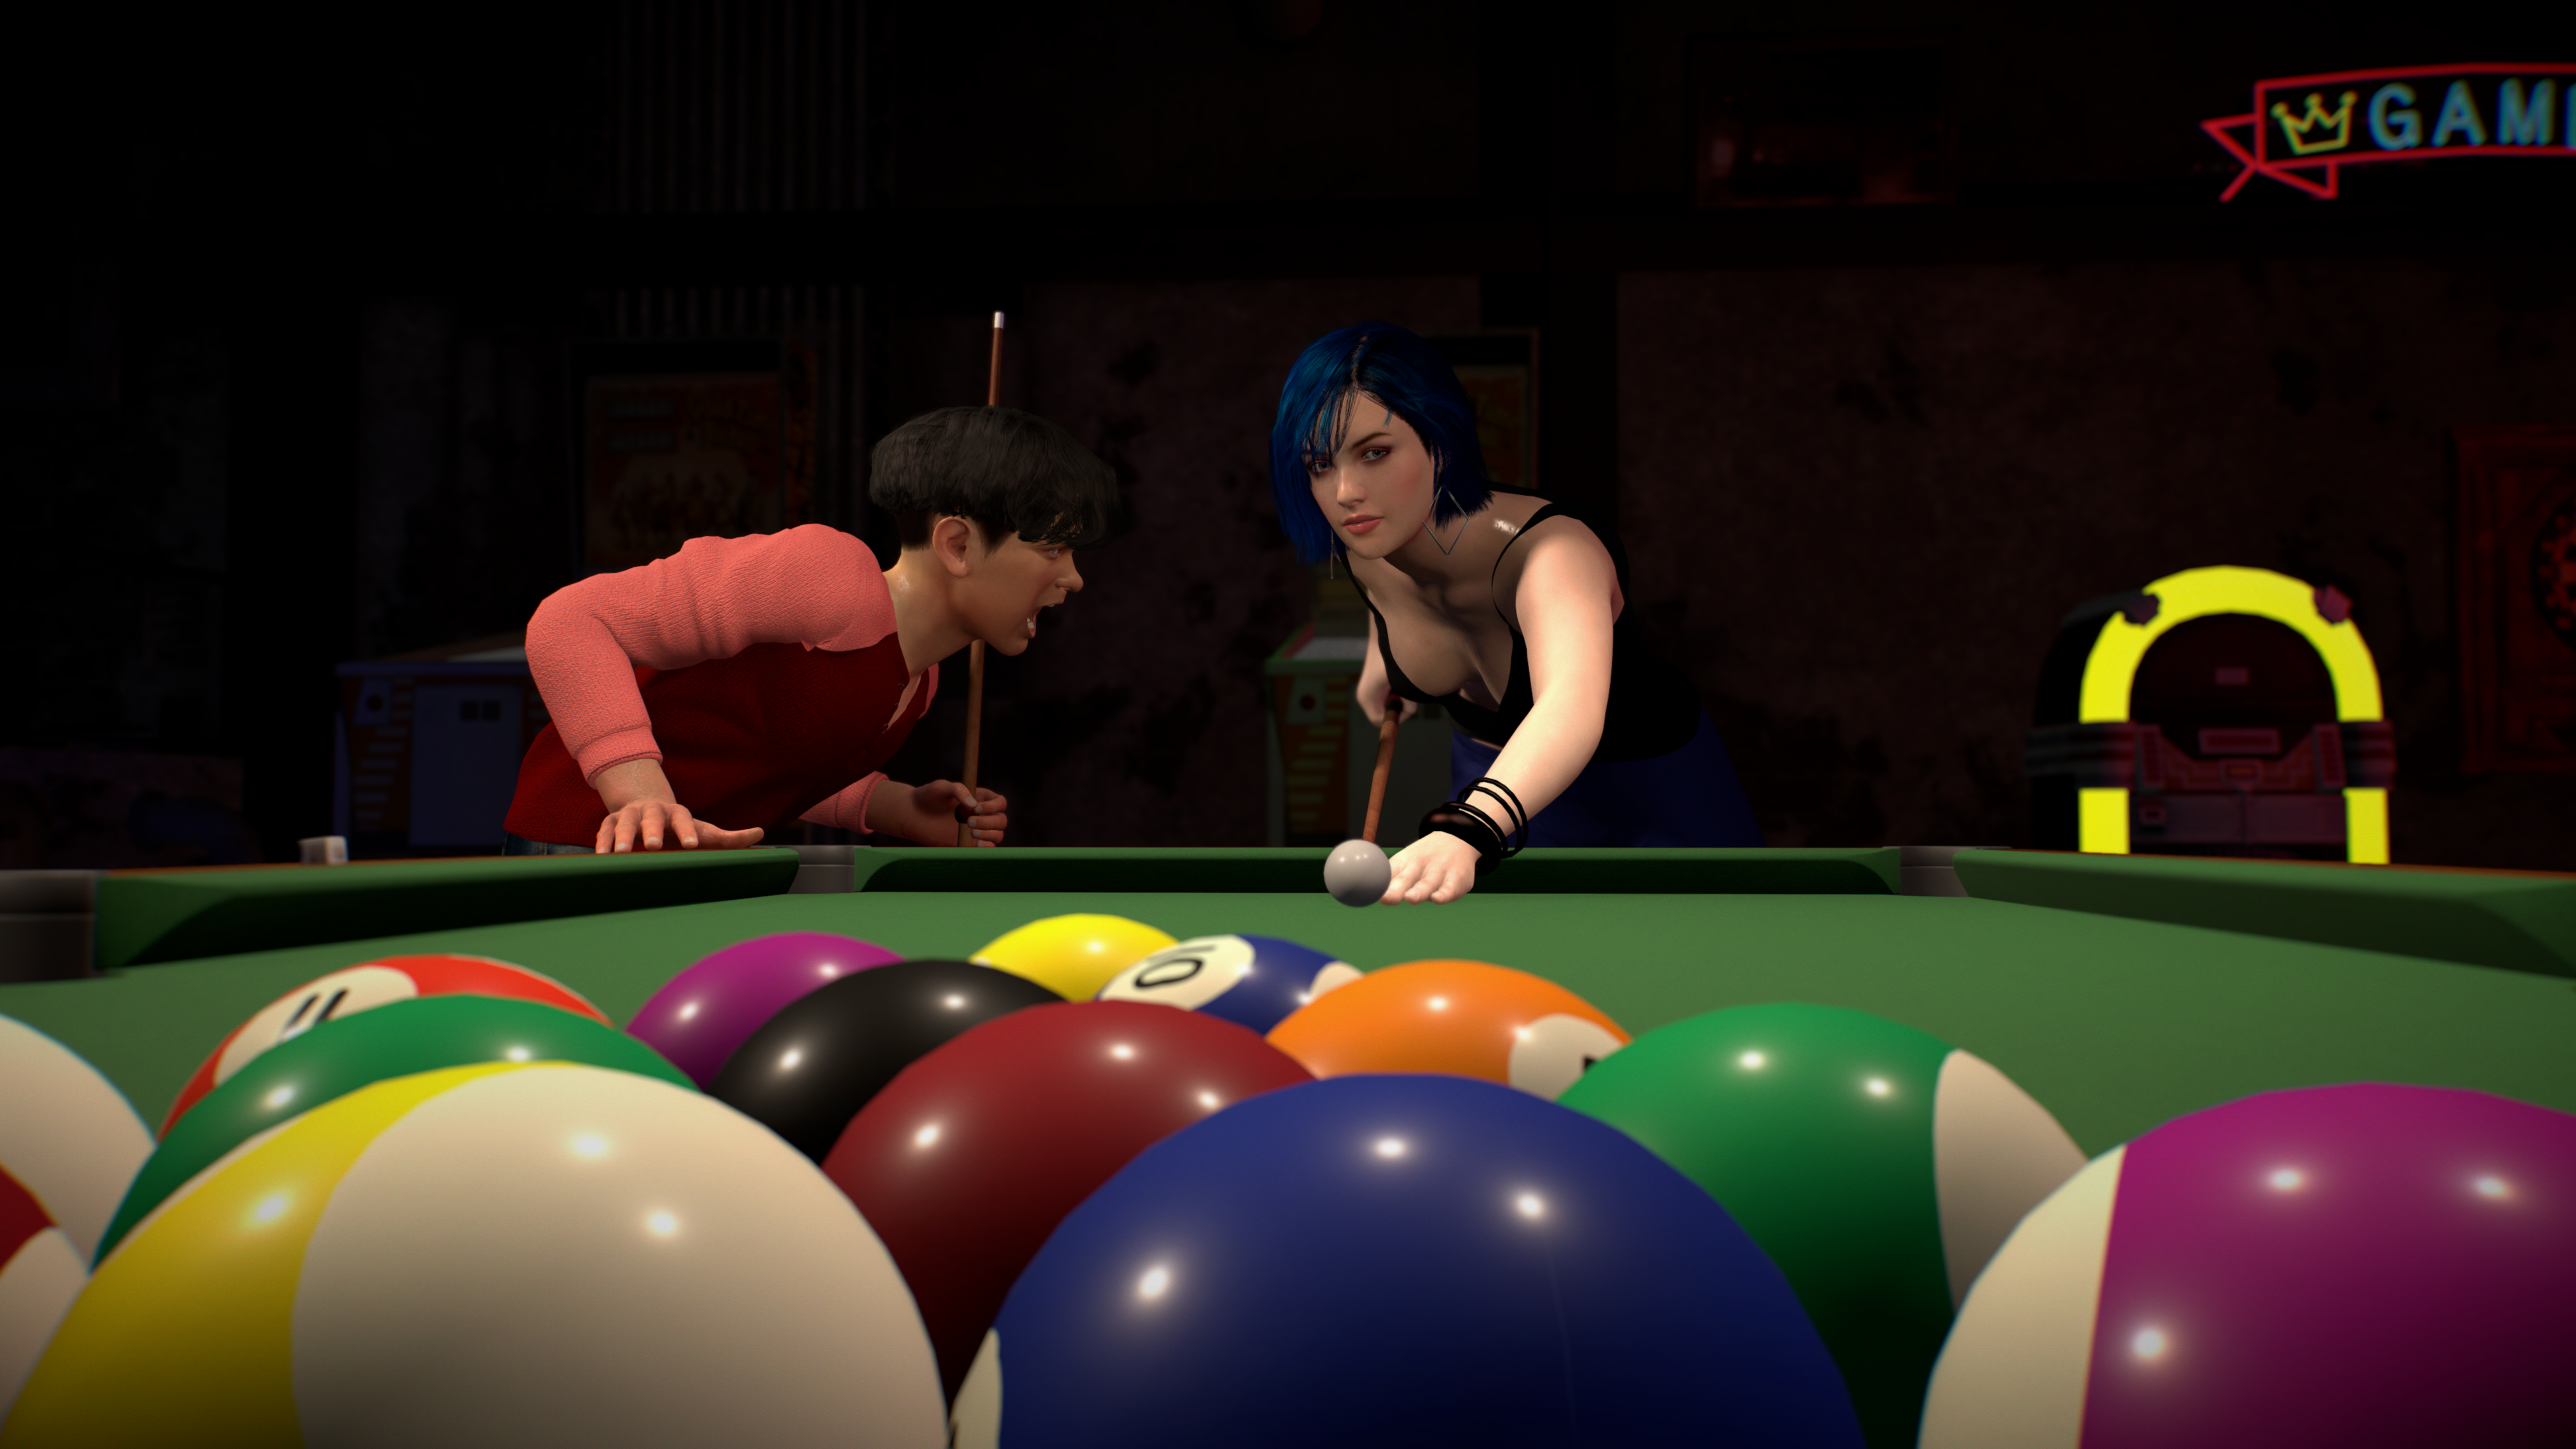 A game of pool